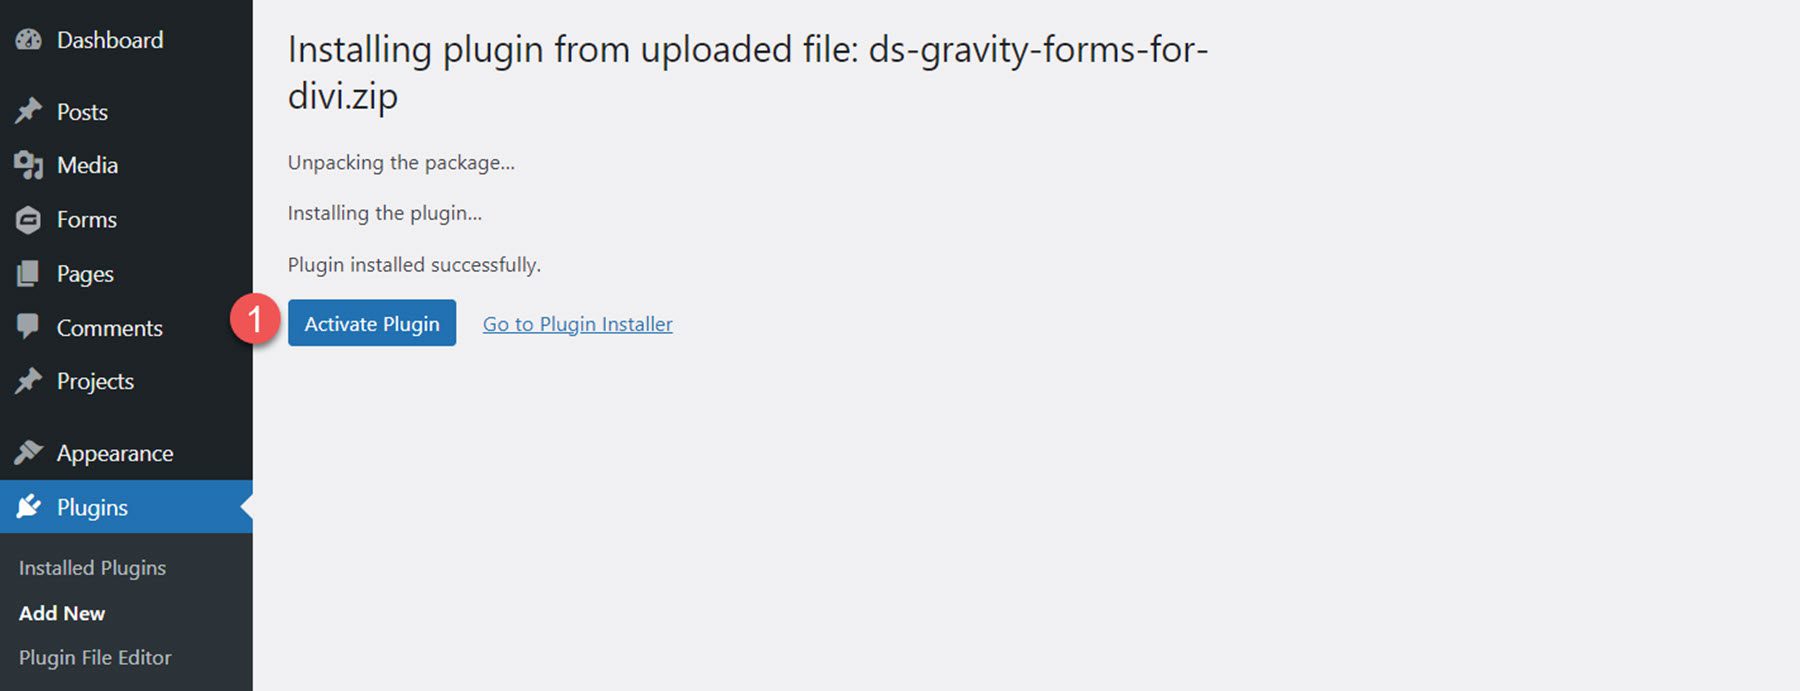 Activate Gravity Forms Styler Module for Divi